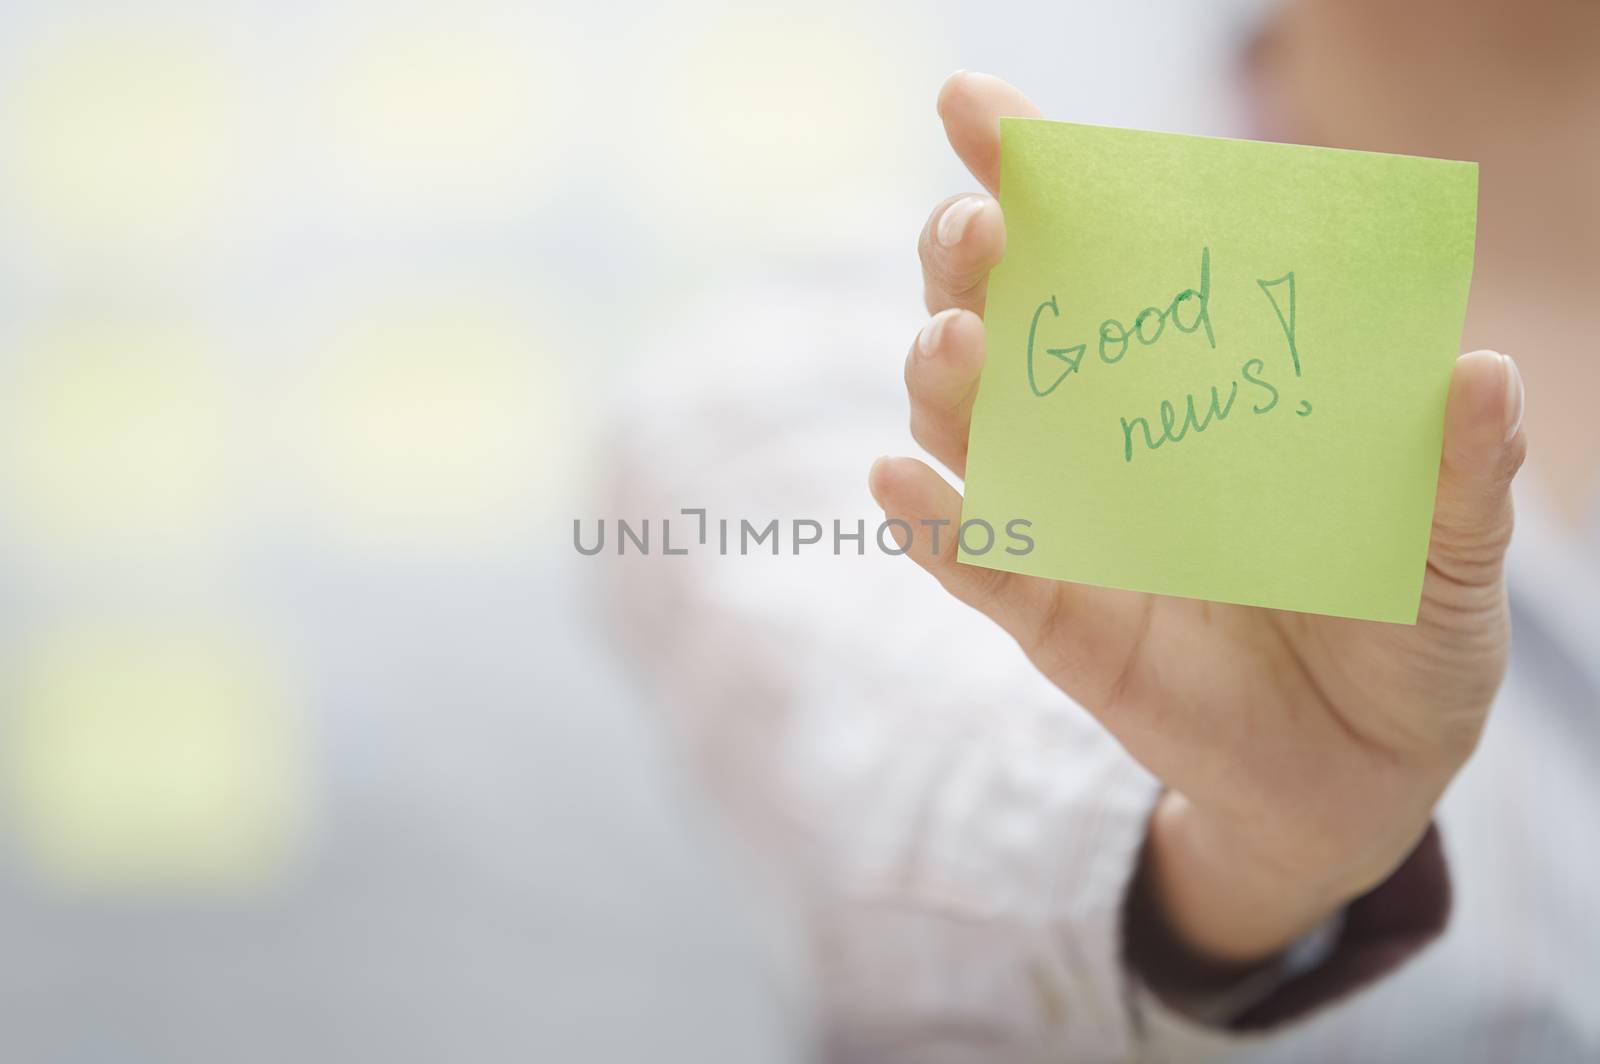 Good news text on adhesive note by Novic